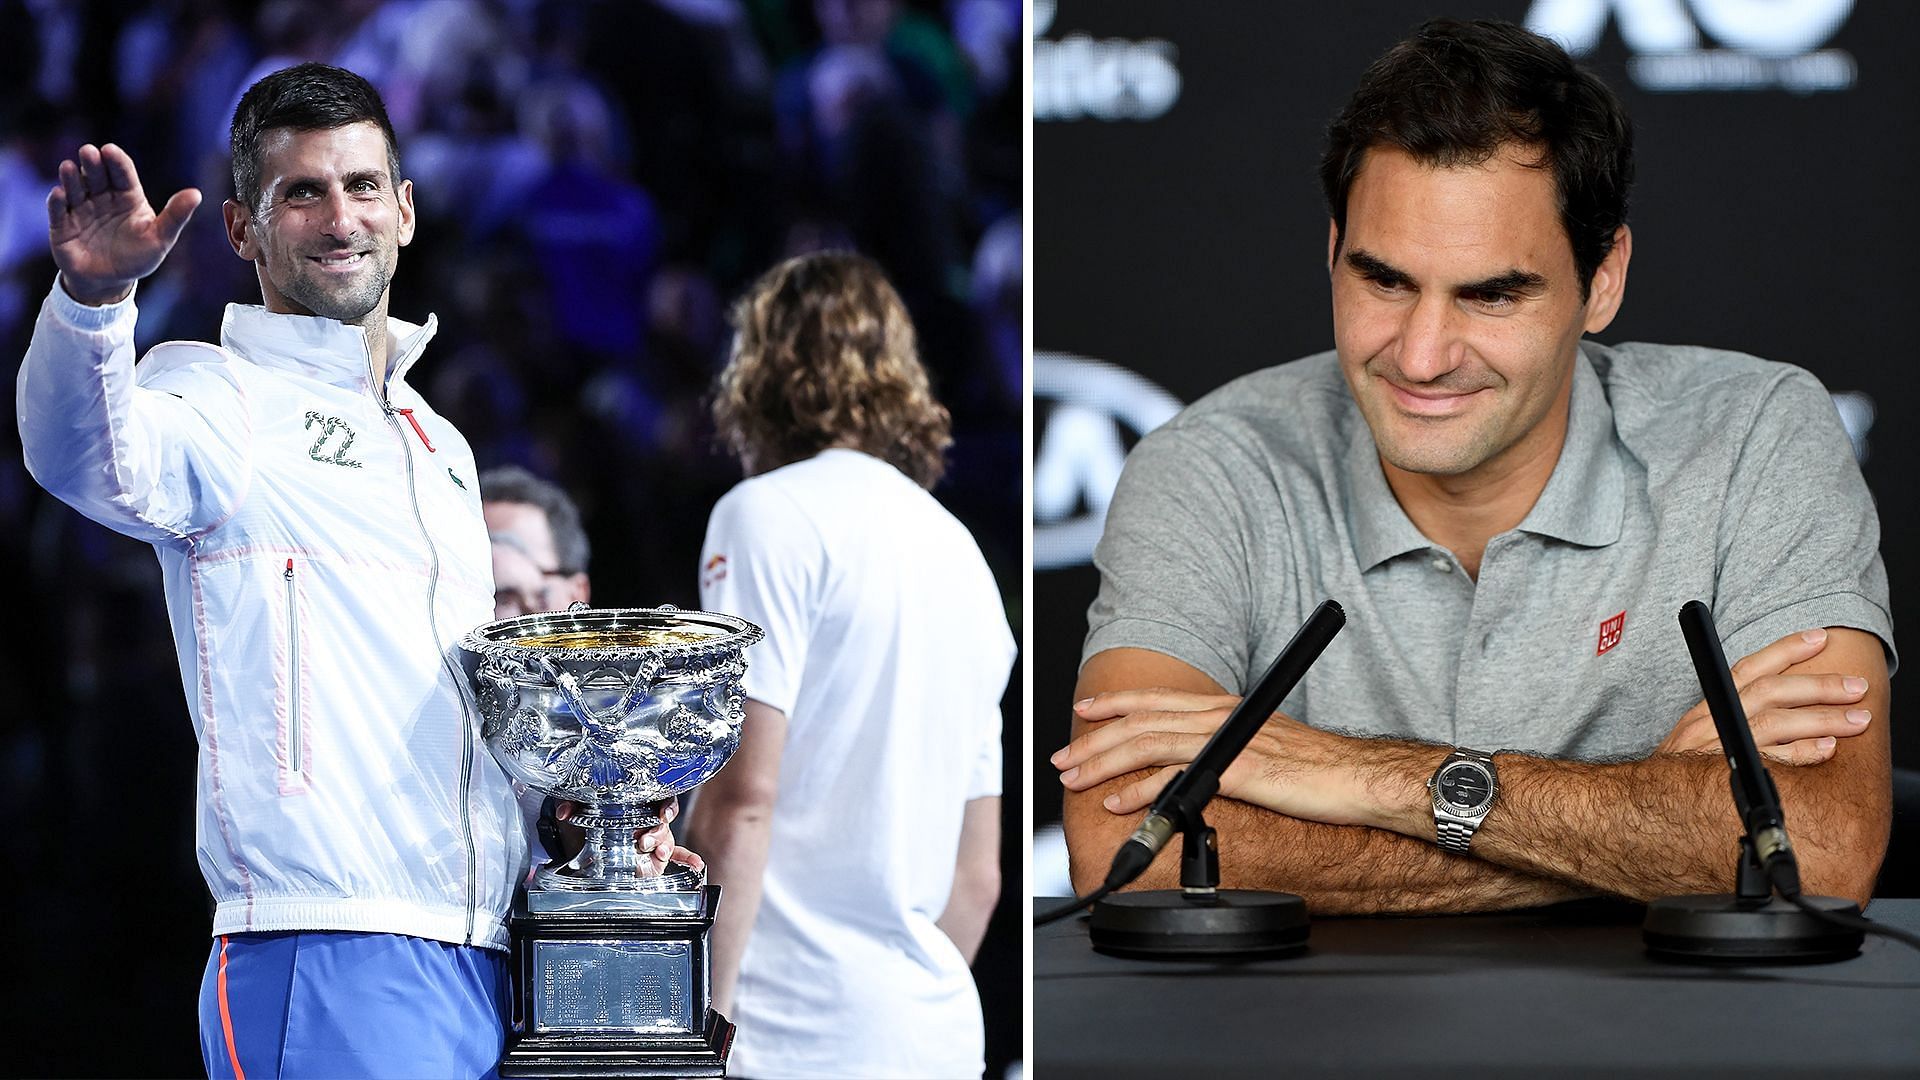 Roger Federer is in talks to join the BBC